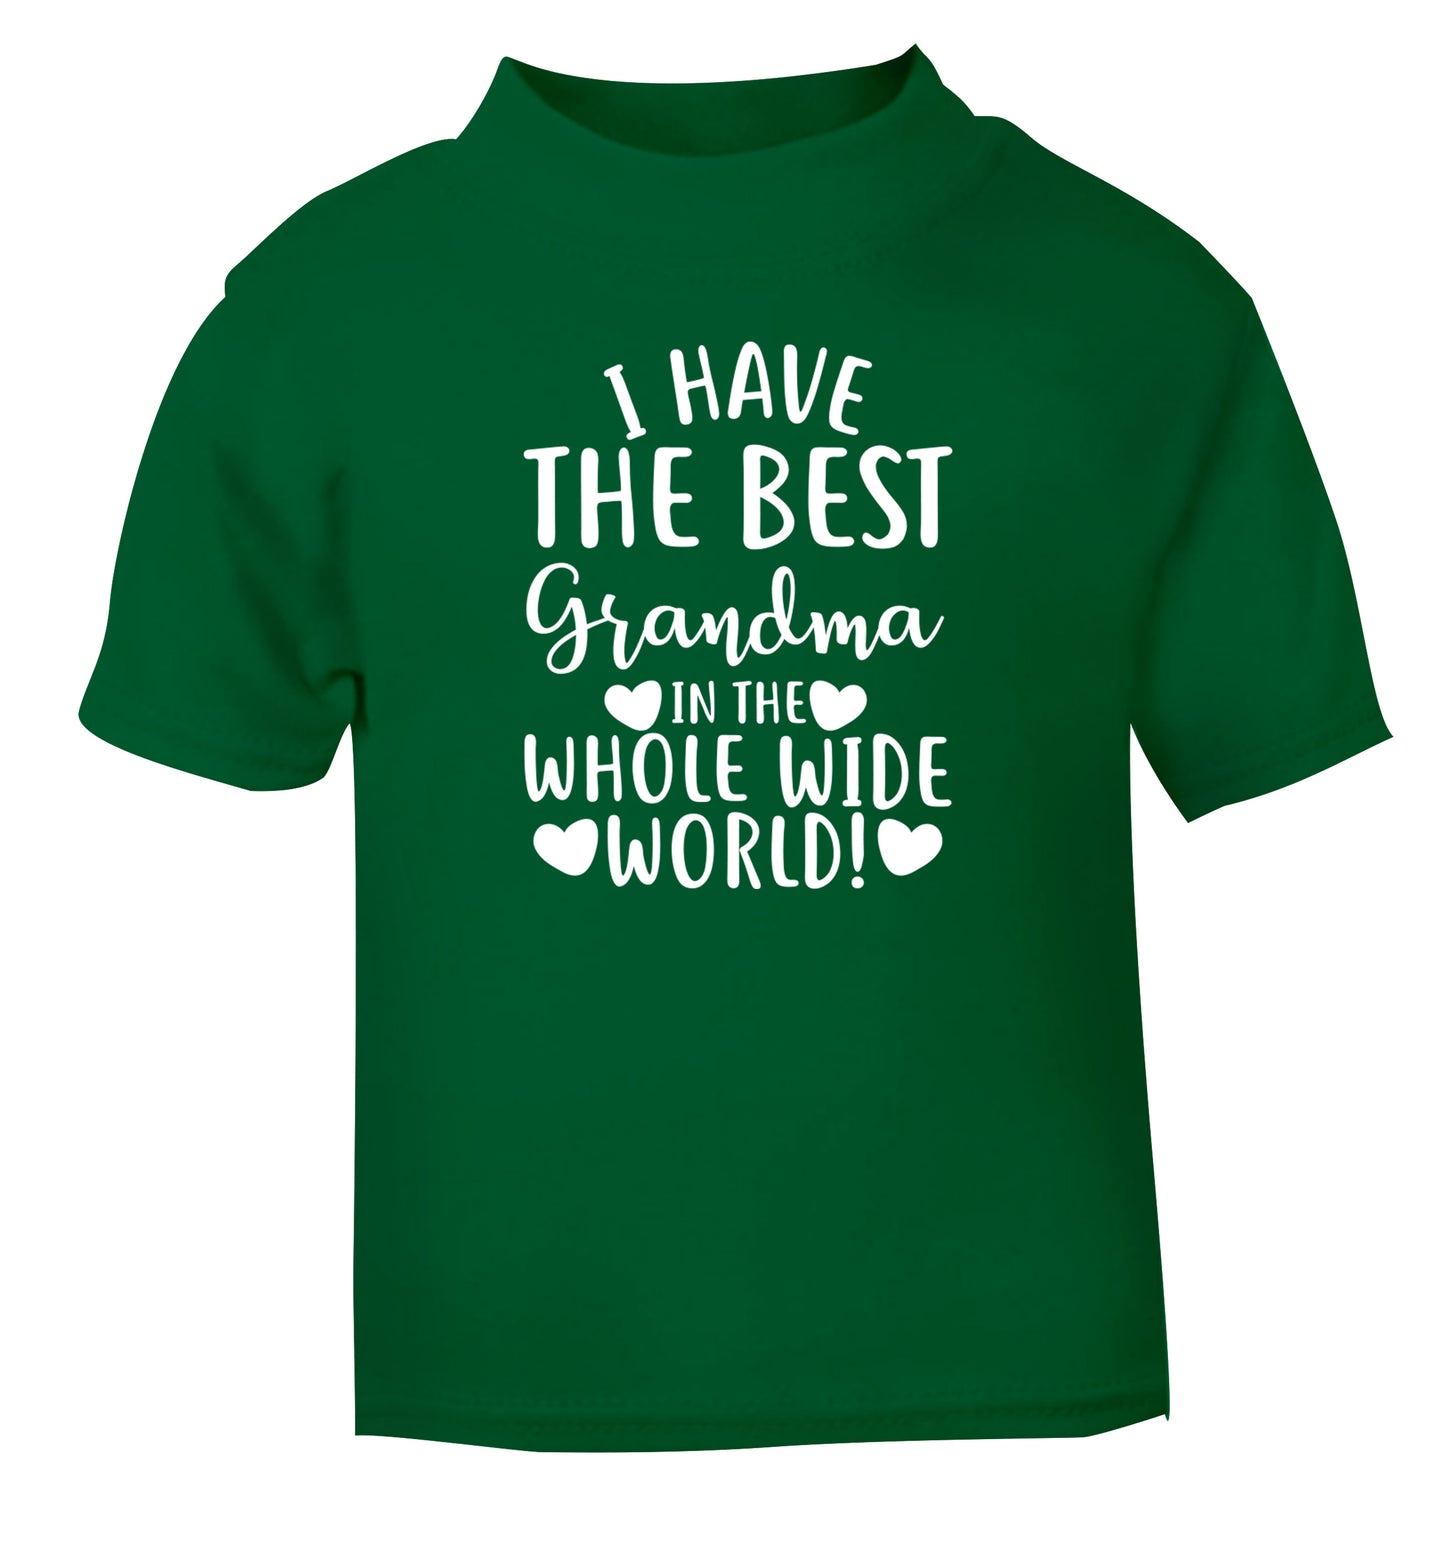 I have the best grandma in the whole wide world! green Baby Toddler Tshirt 2 Years